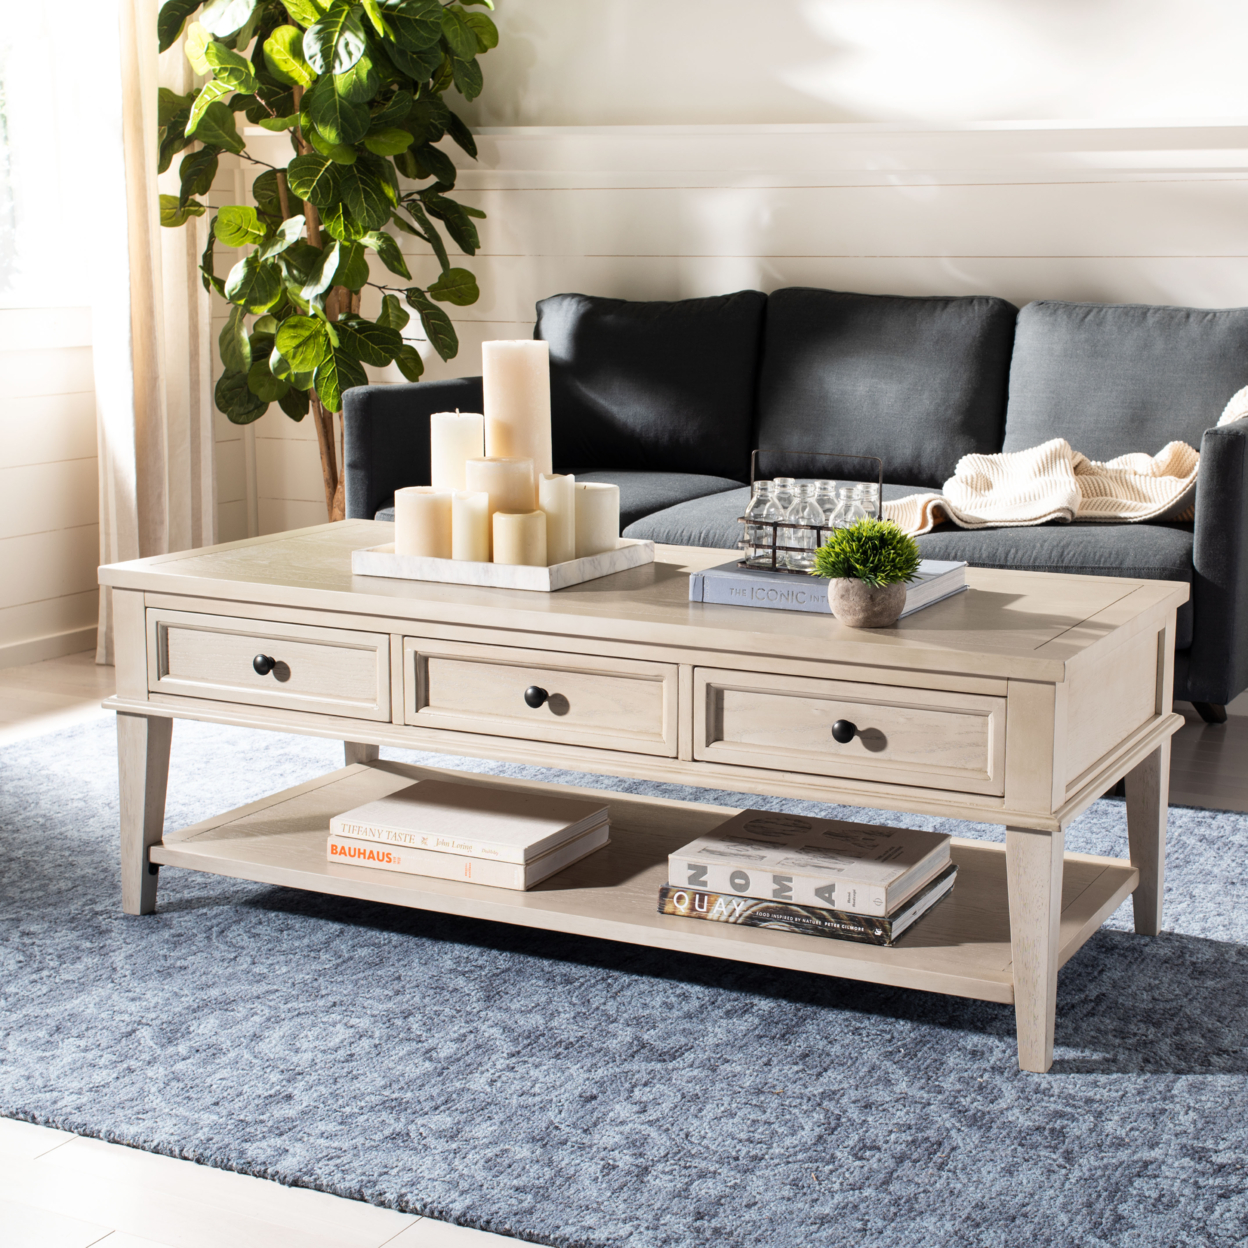 SAFAVIEH Manelin Coffee Table With Storage Drawers White Washed